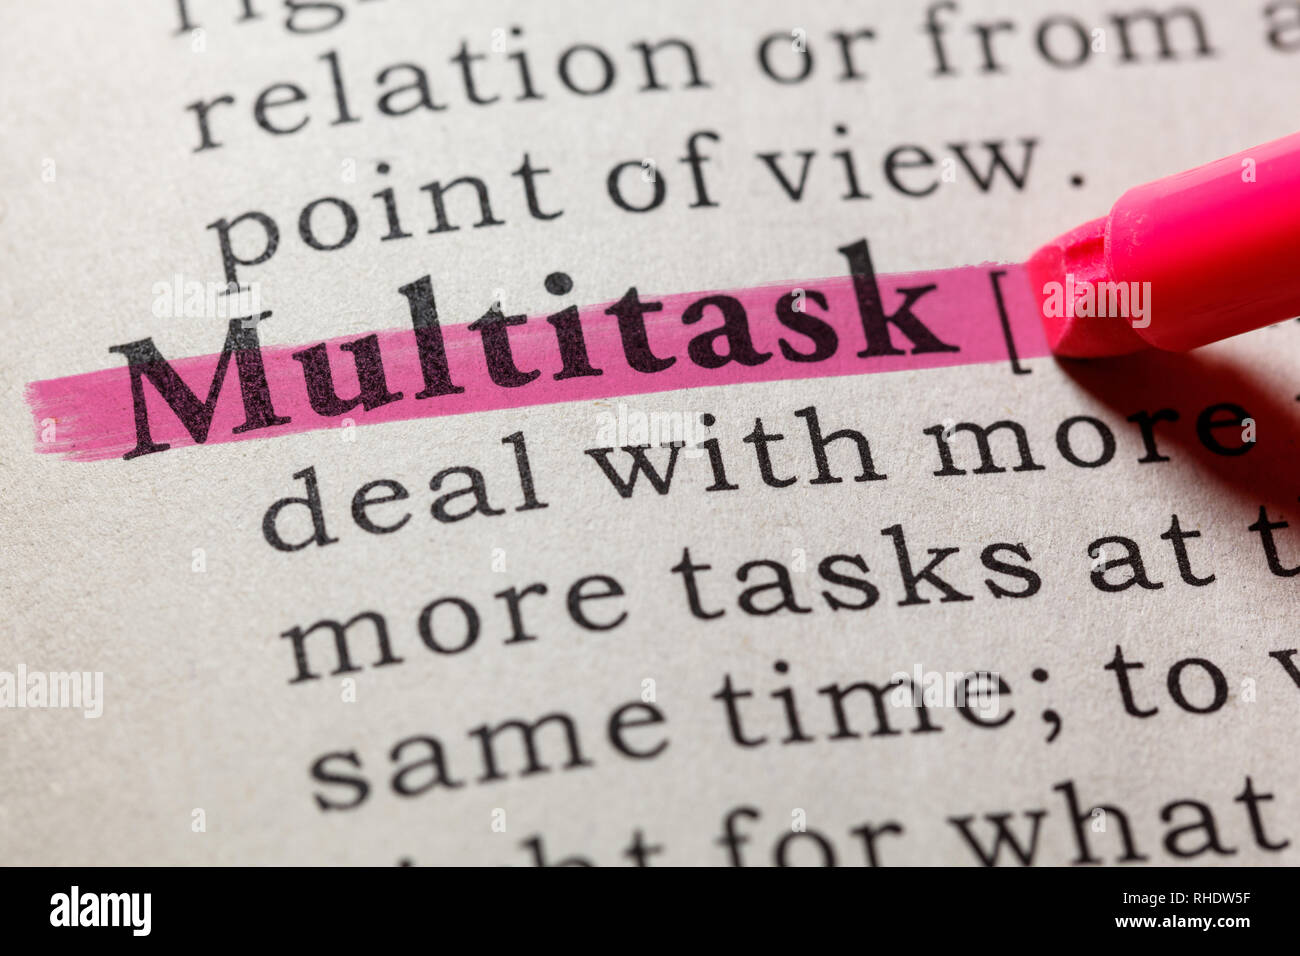 Fake Dictionary, Dictionary definition of the word multitask. including key descriptive words. Stock Photo